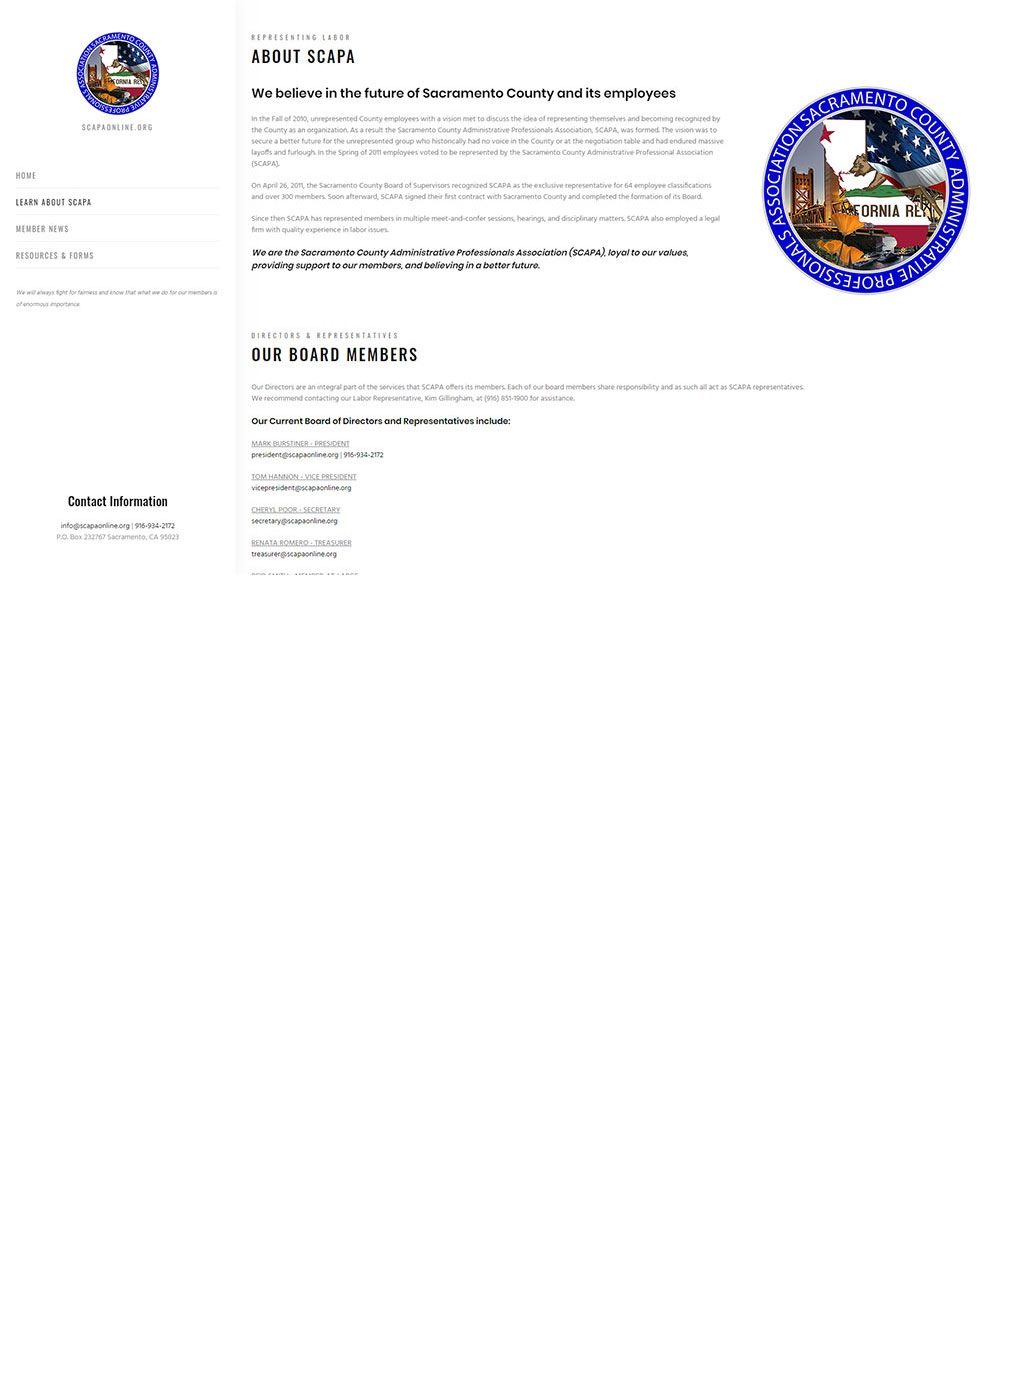 About us and board of directors page developed for Sacramento county labor union website